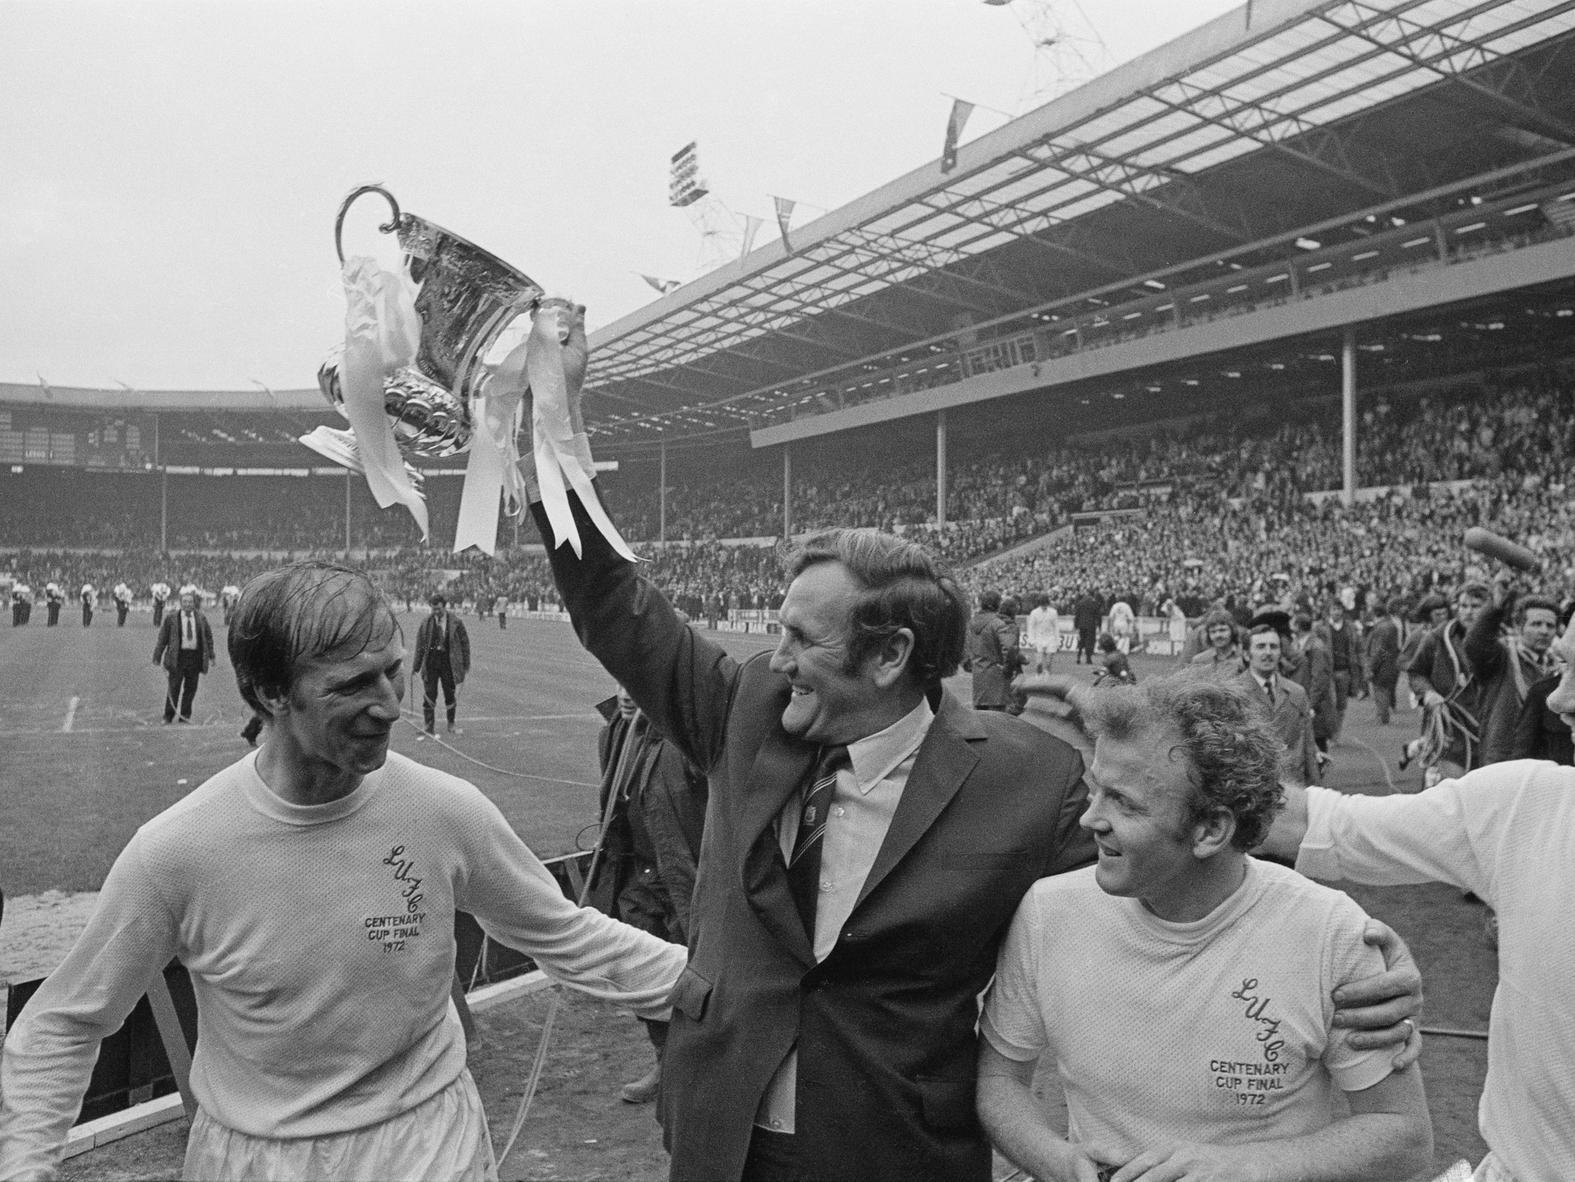 Don Revie lifts the FA Cup after his team beat Arsenal. Also shown are Jack Charlton (left), Billy Bremner, and Paul Reaney (far right).